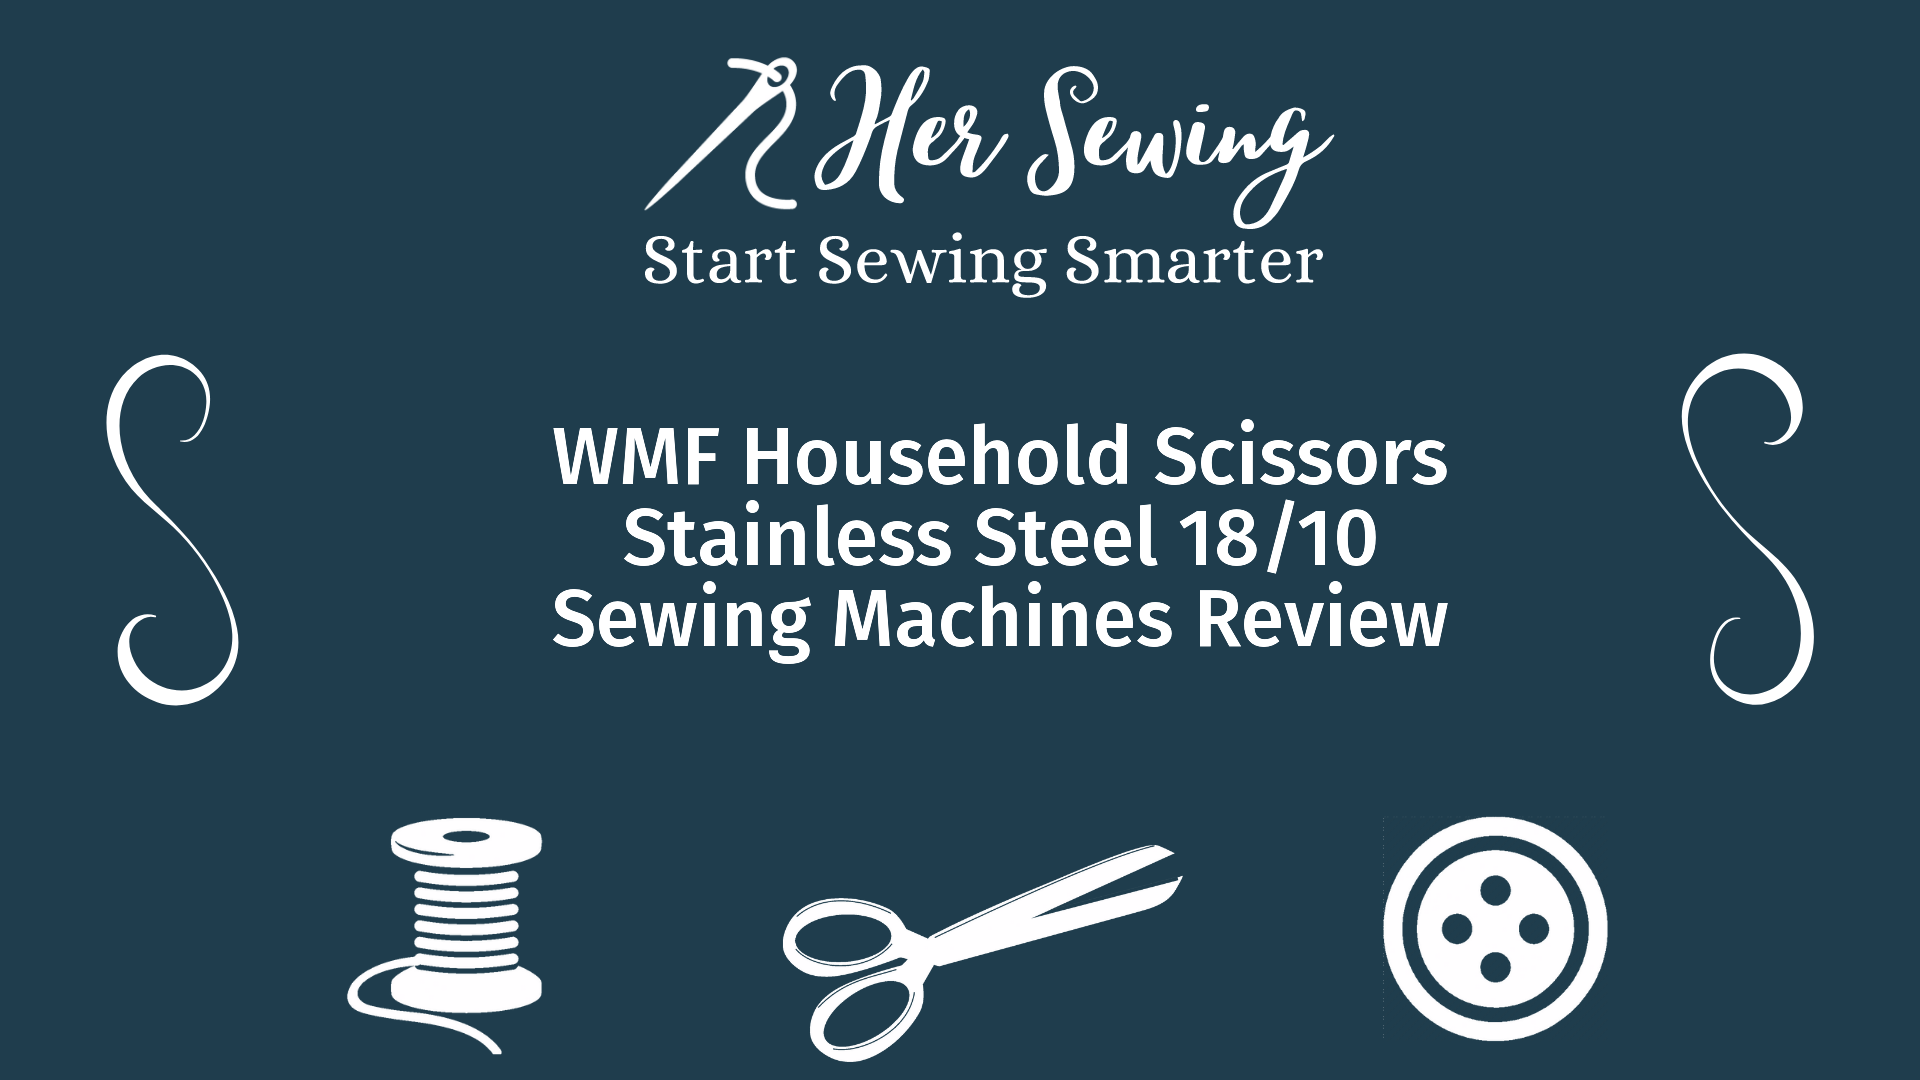 WMF Household Scissors Stainless Steel 18/10 Sewing Machines Review